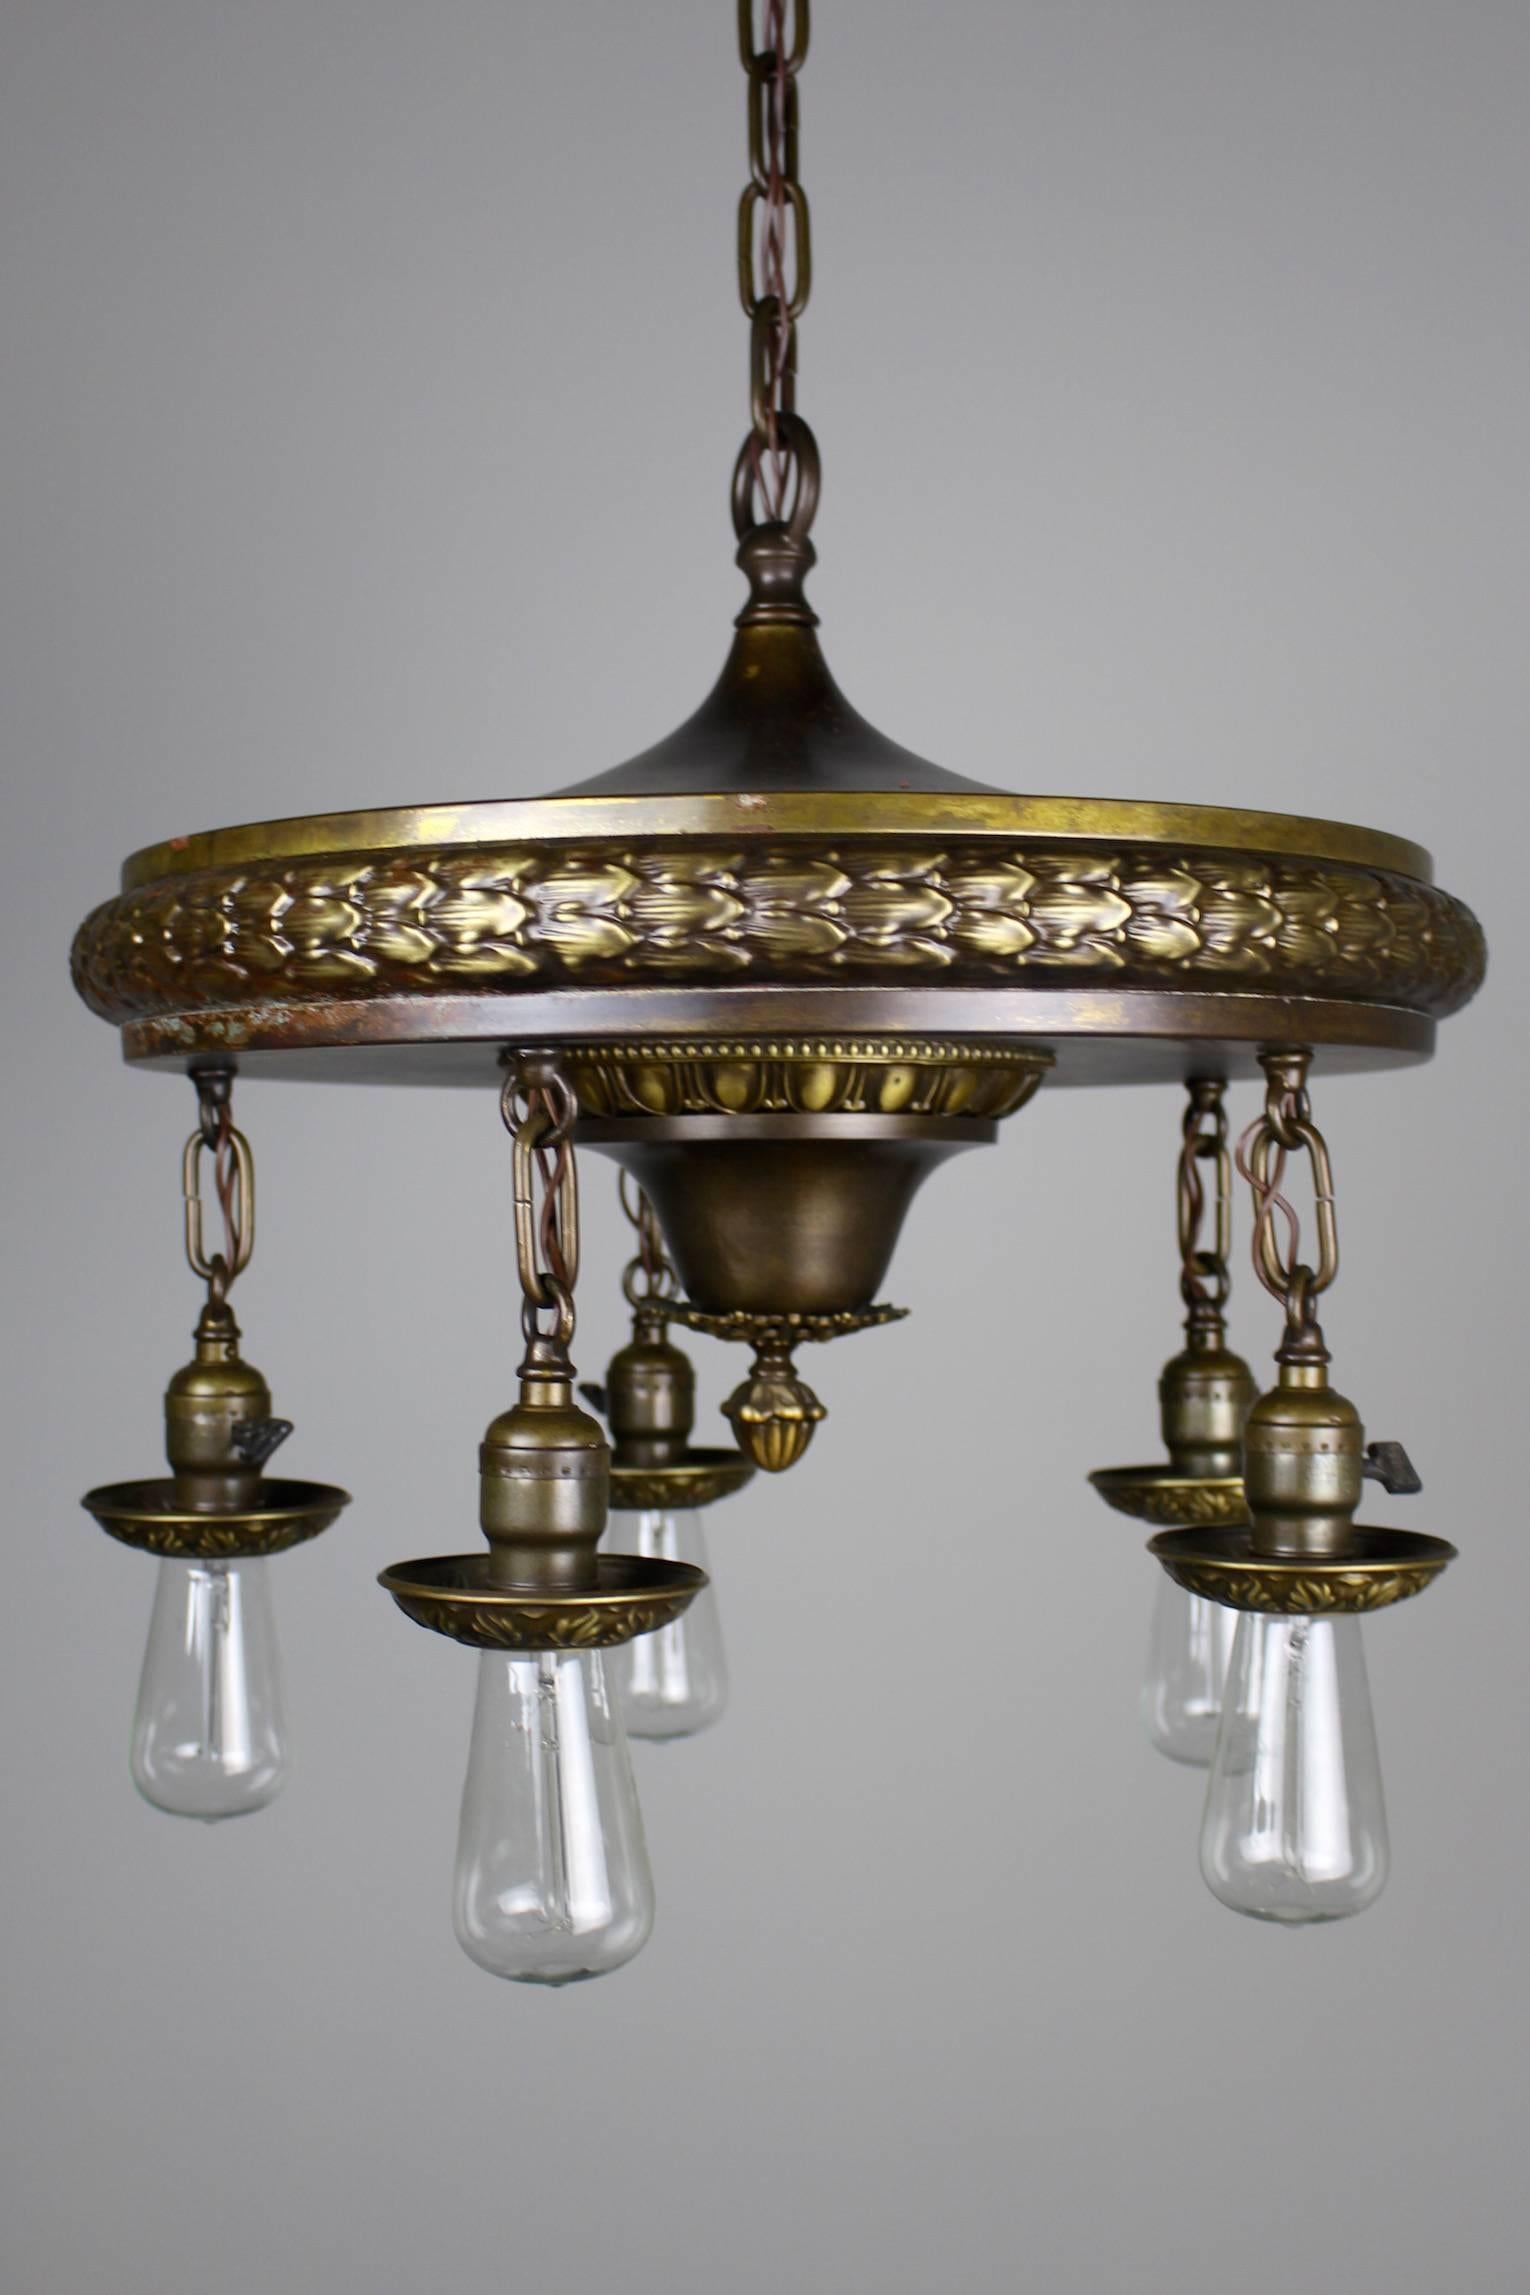 Circa 1920s This dining room fixture is done in the style of Neoclassical Revival using the acanthus leaf pattern, egg & dart pattern, and wreath as design elements. this light has been cleaned, rewired, and restored. Fitted with Edoson bulbs